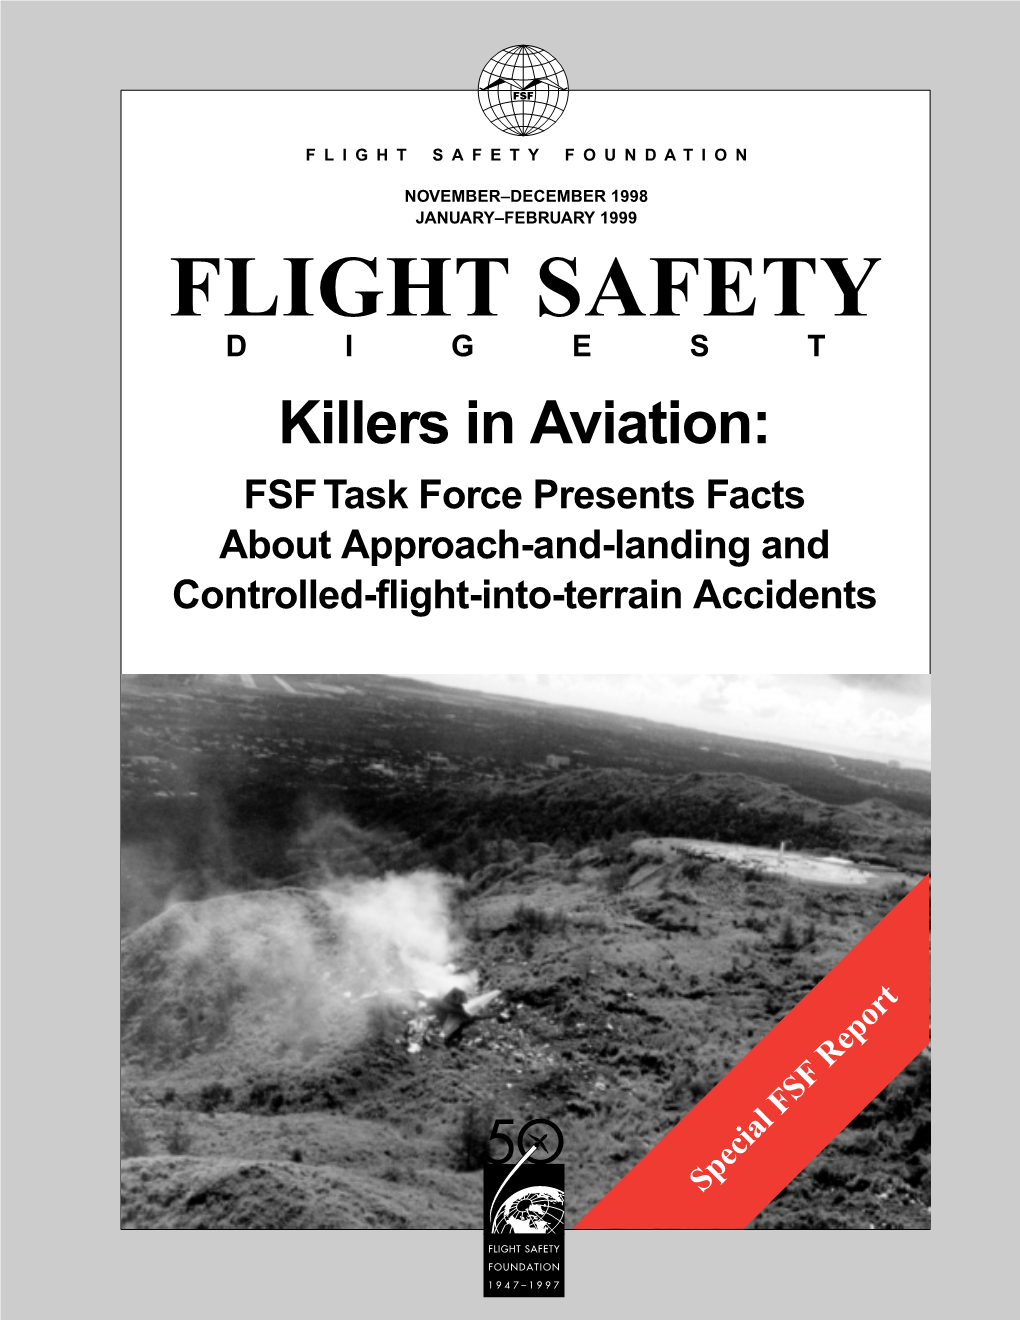 Killers in Aviation: FSF Task Force Presents Facts About Approach-And-Landing and Controlled-Flight-Into-Terrain Accidents